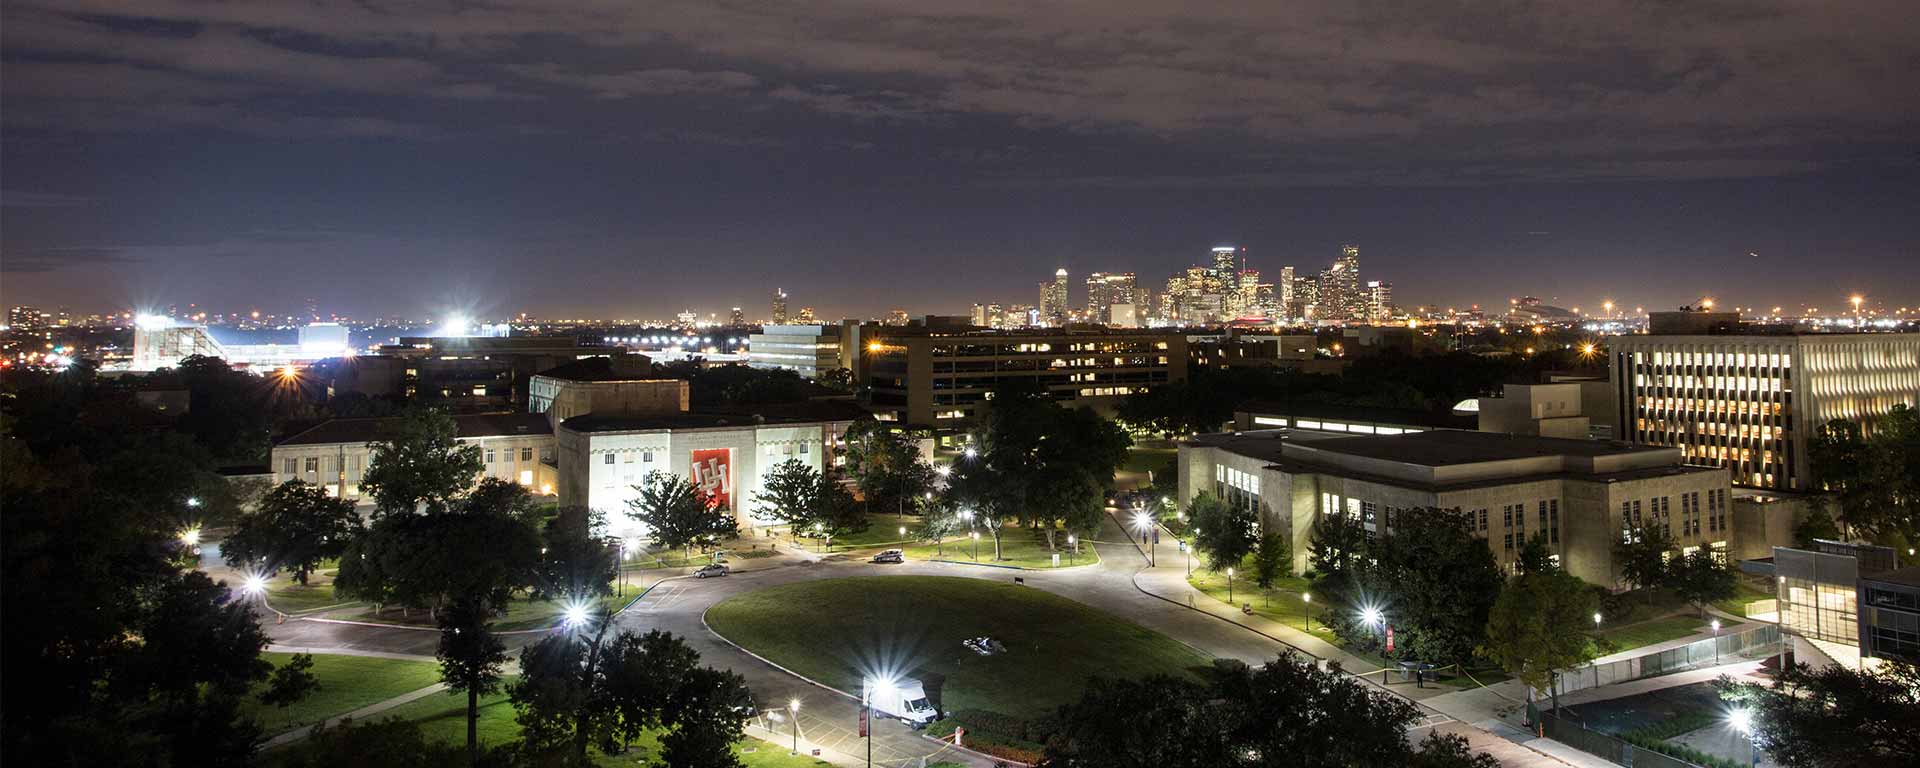 View of Houston at night